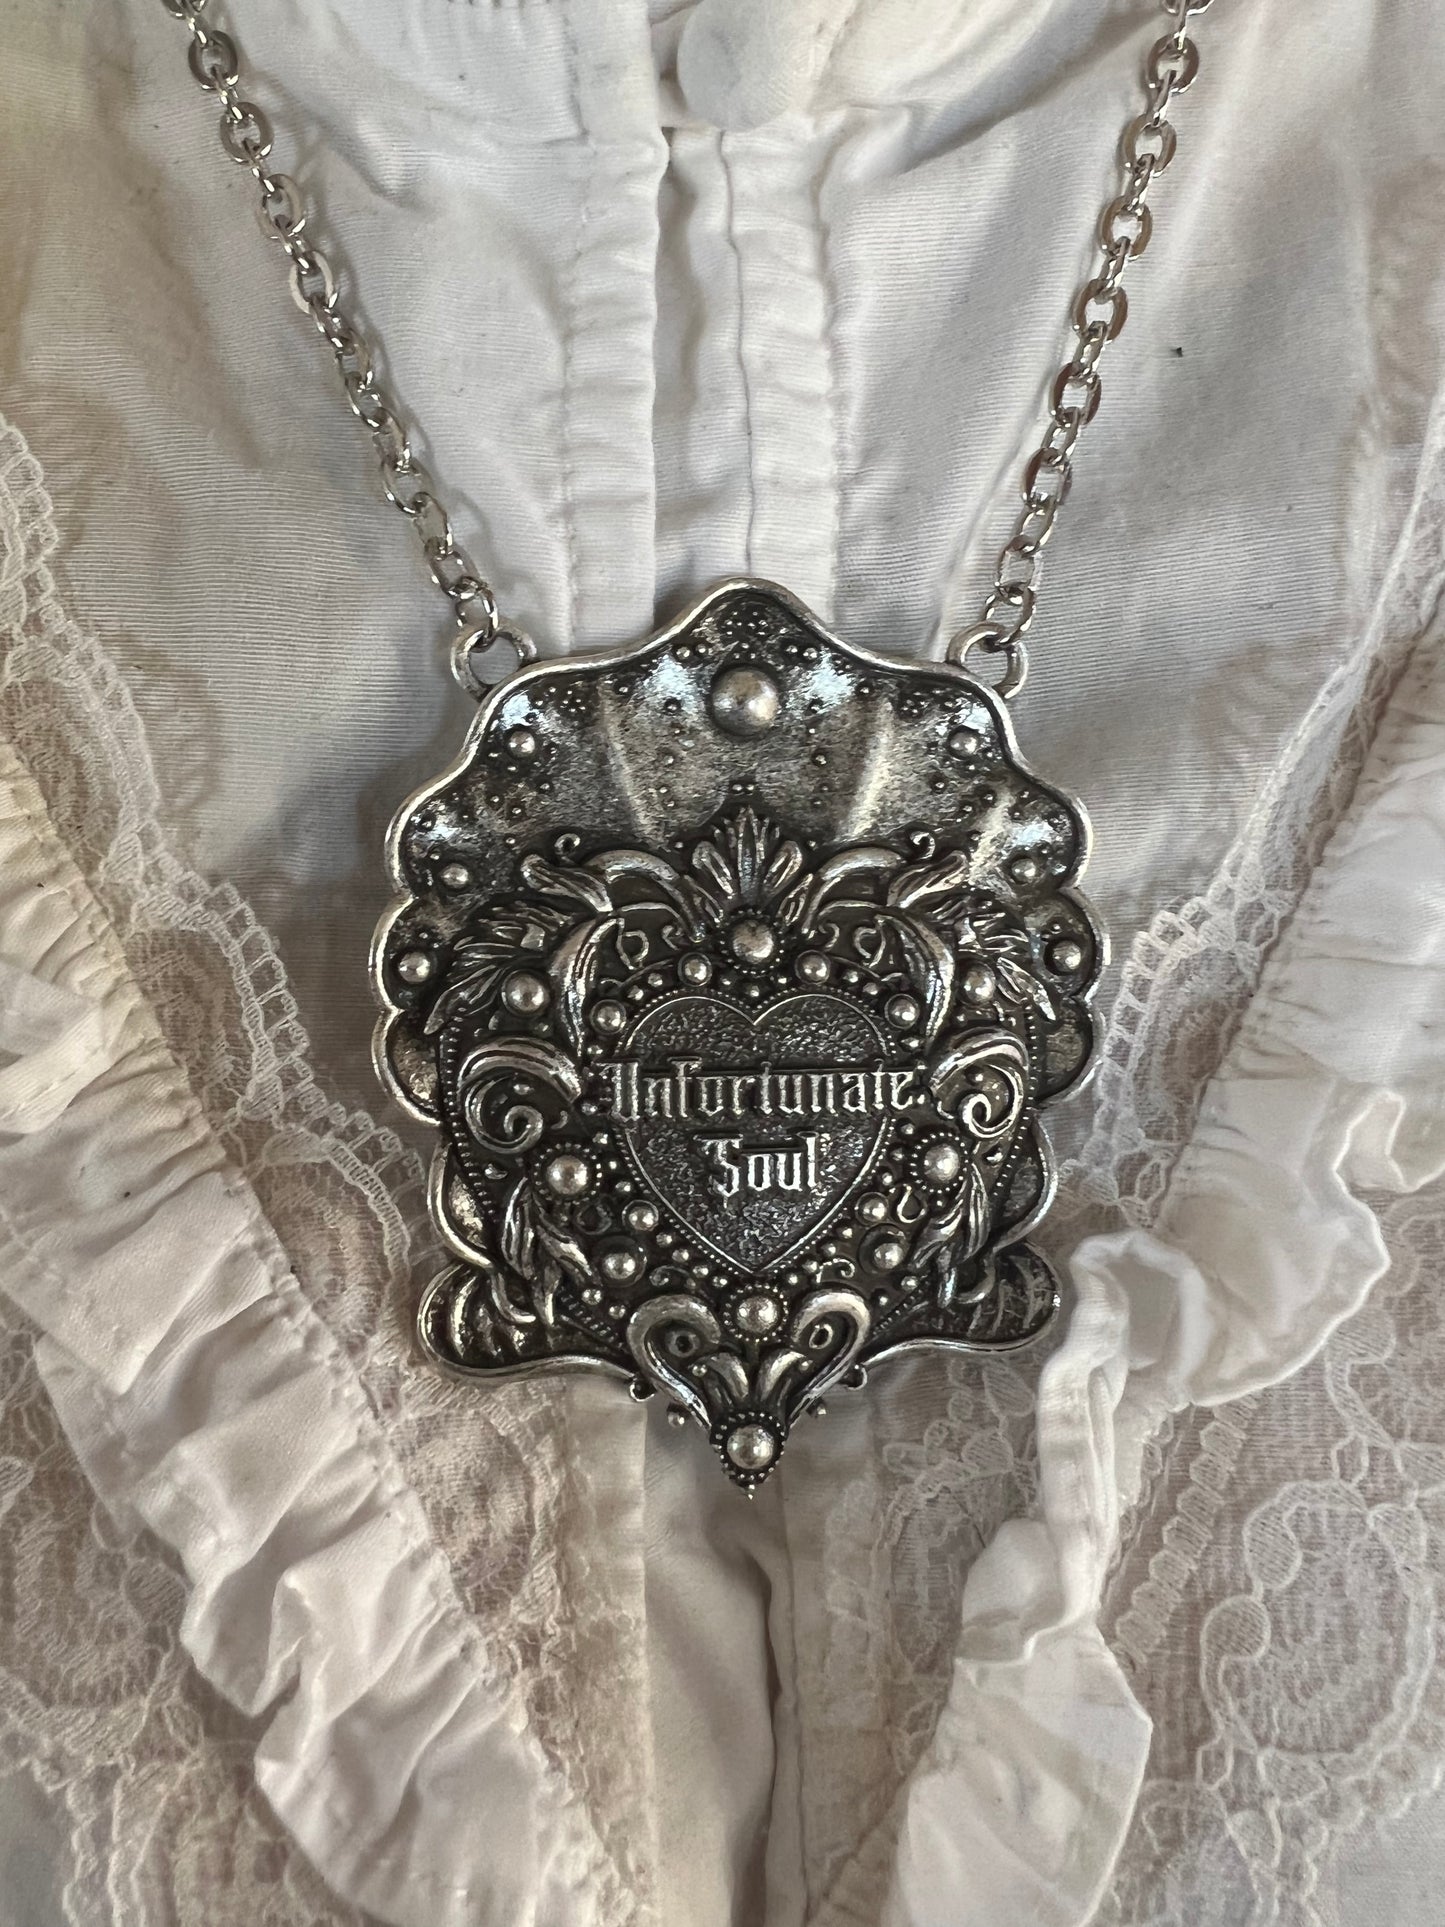 UNFORTUNATE SOUL  - Mother of Hades Cast Necklace